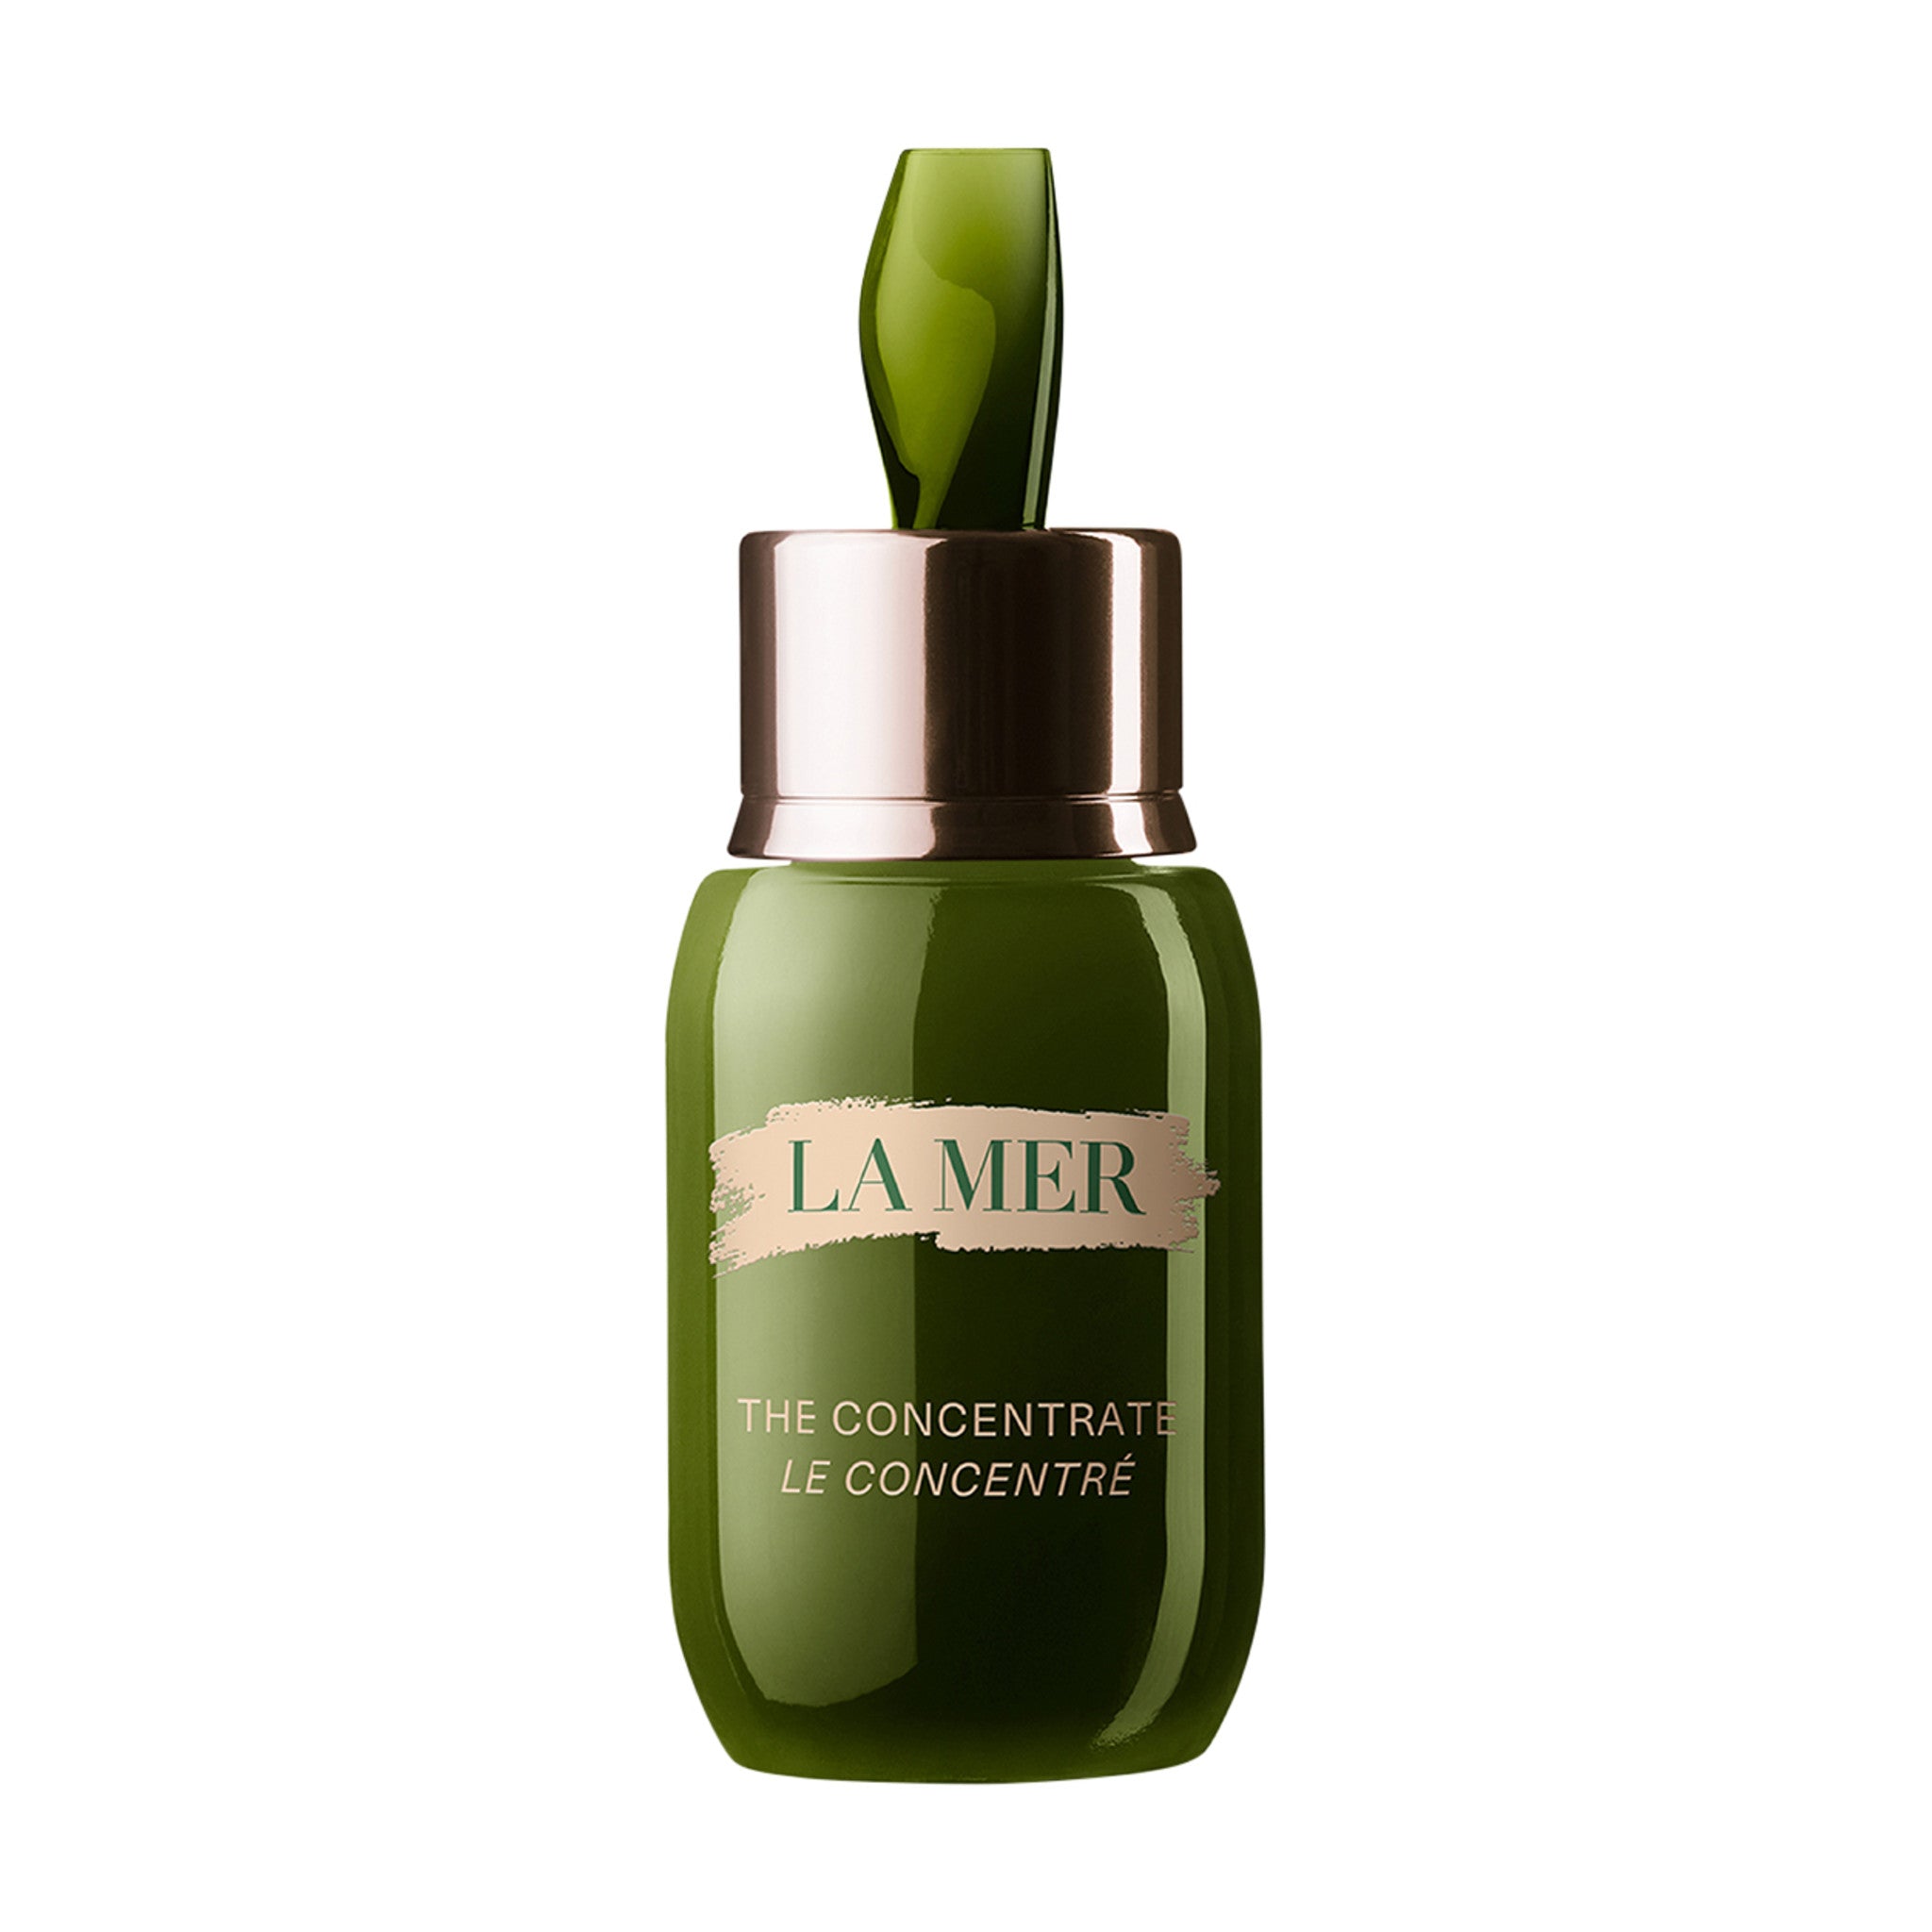 La Mer The Concentrate Size variant: 0.5 oz. main image.